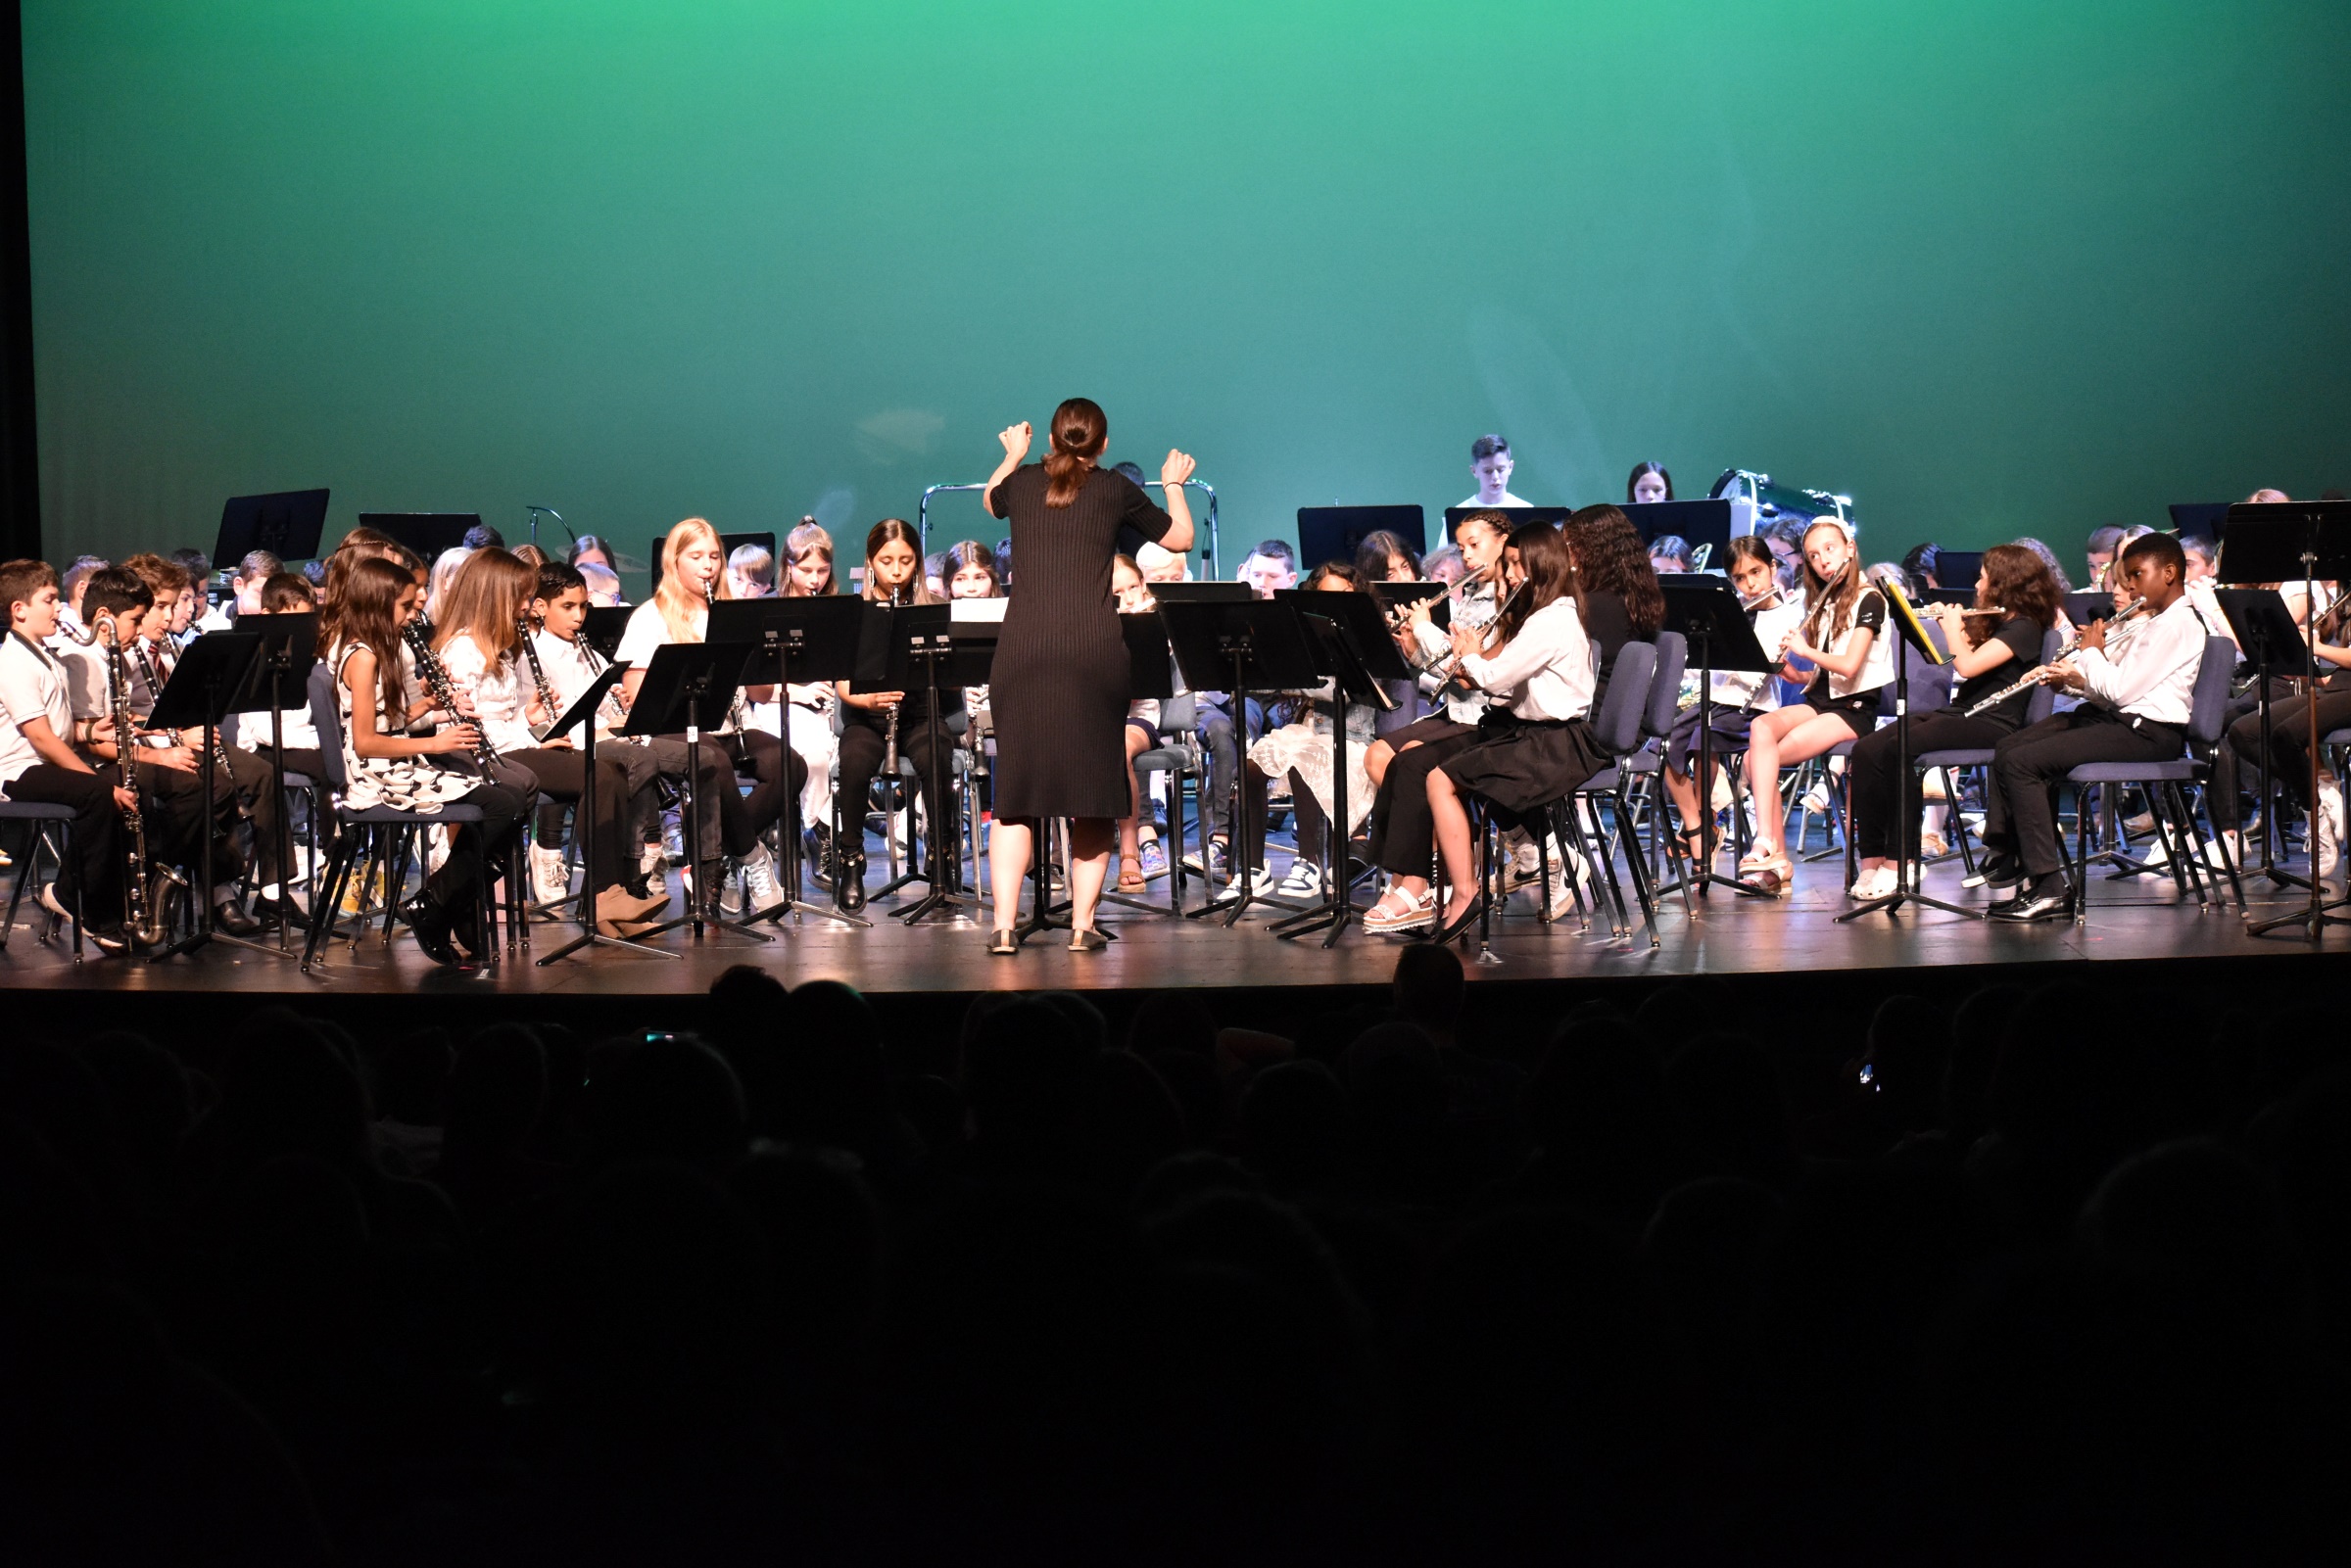 Our Middle School Jazz Band and Grade Level Bands had wonderful performances at their Spring Concerts!